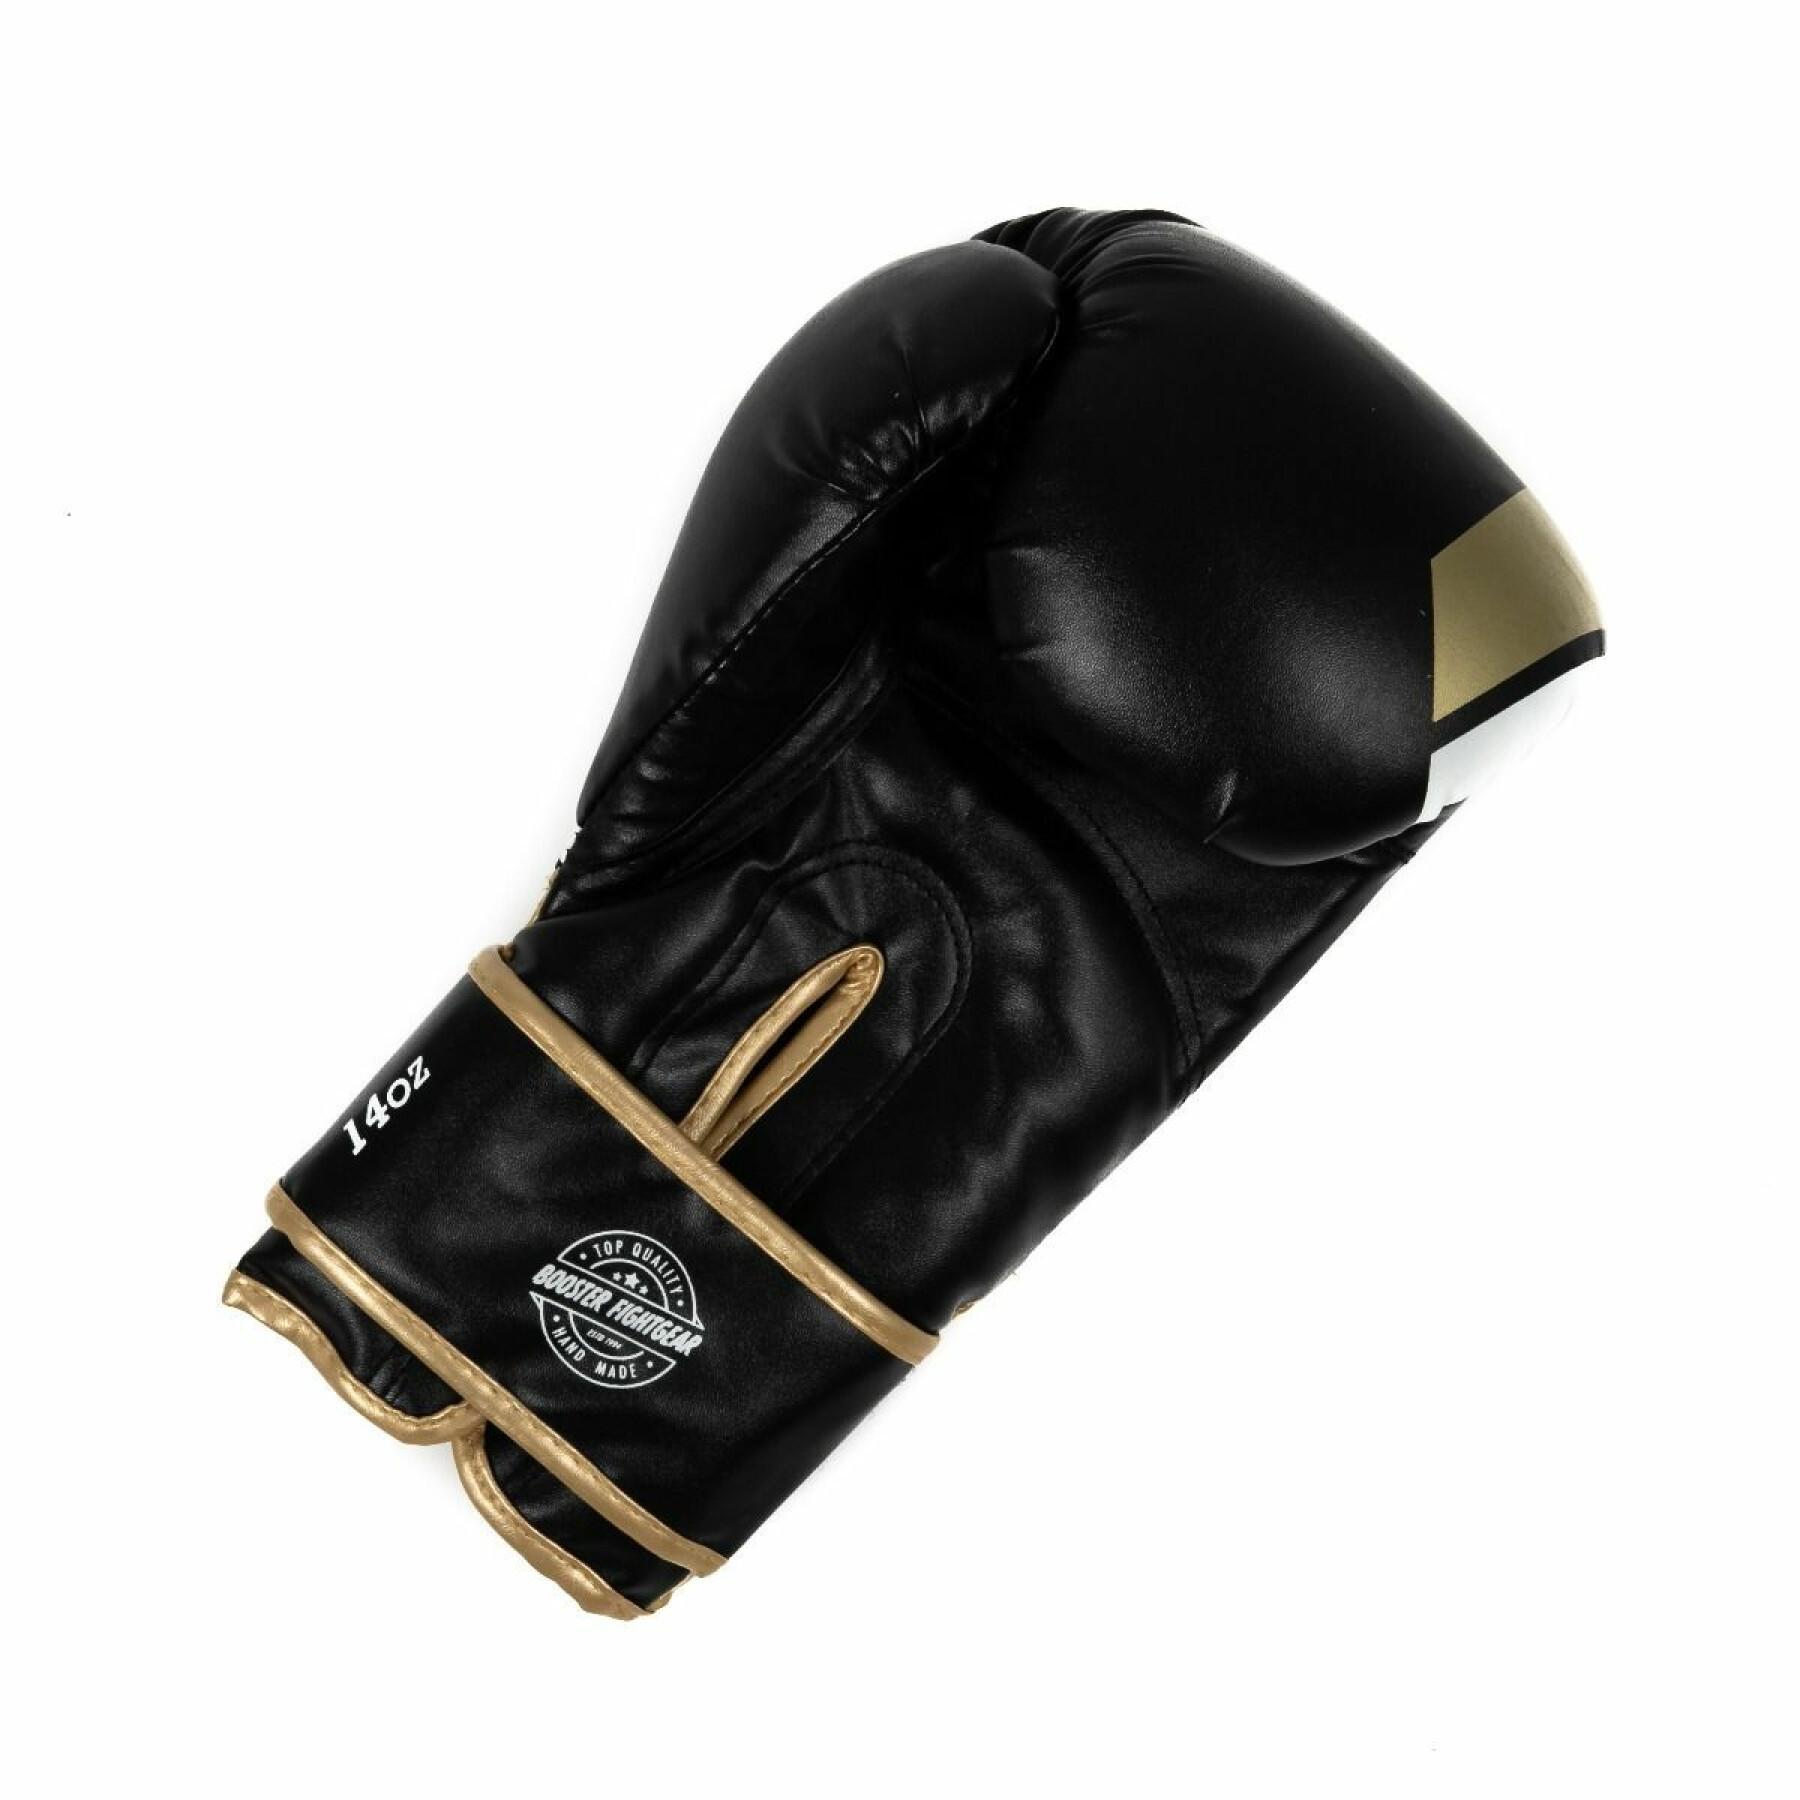 Guantes de boxeo Booster Fight Gear Bt Sparring V2